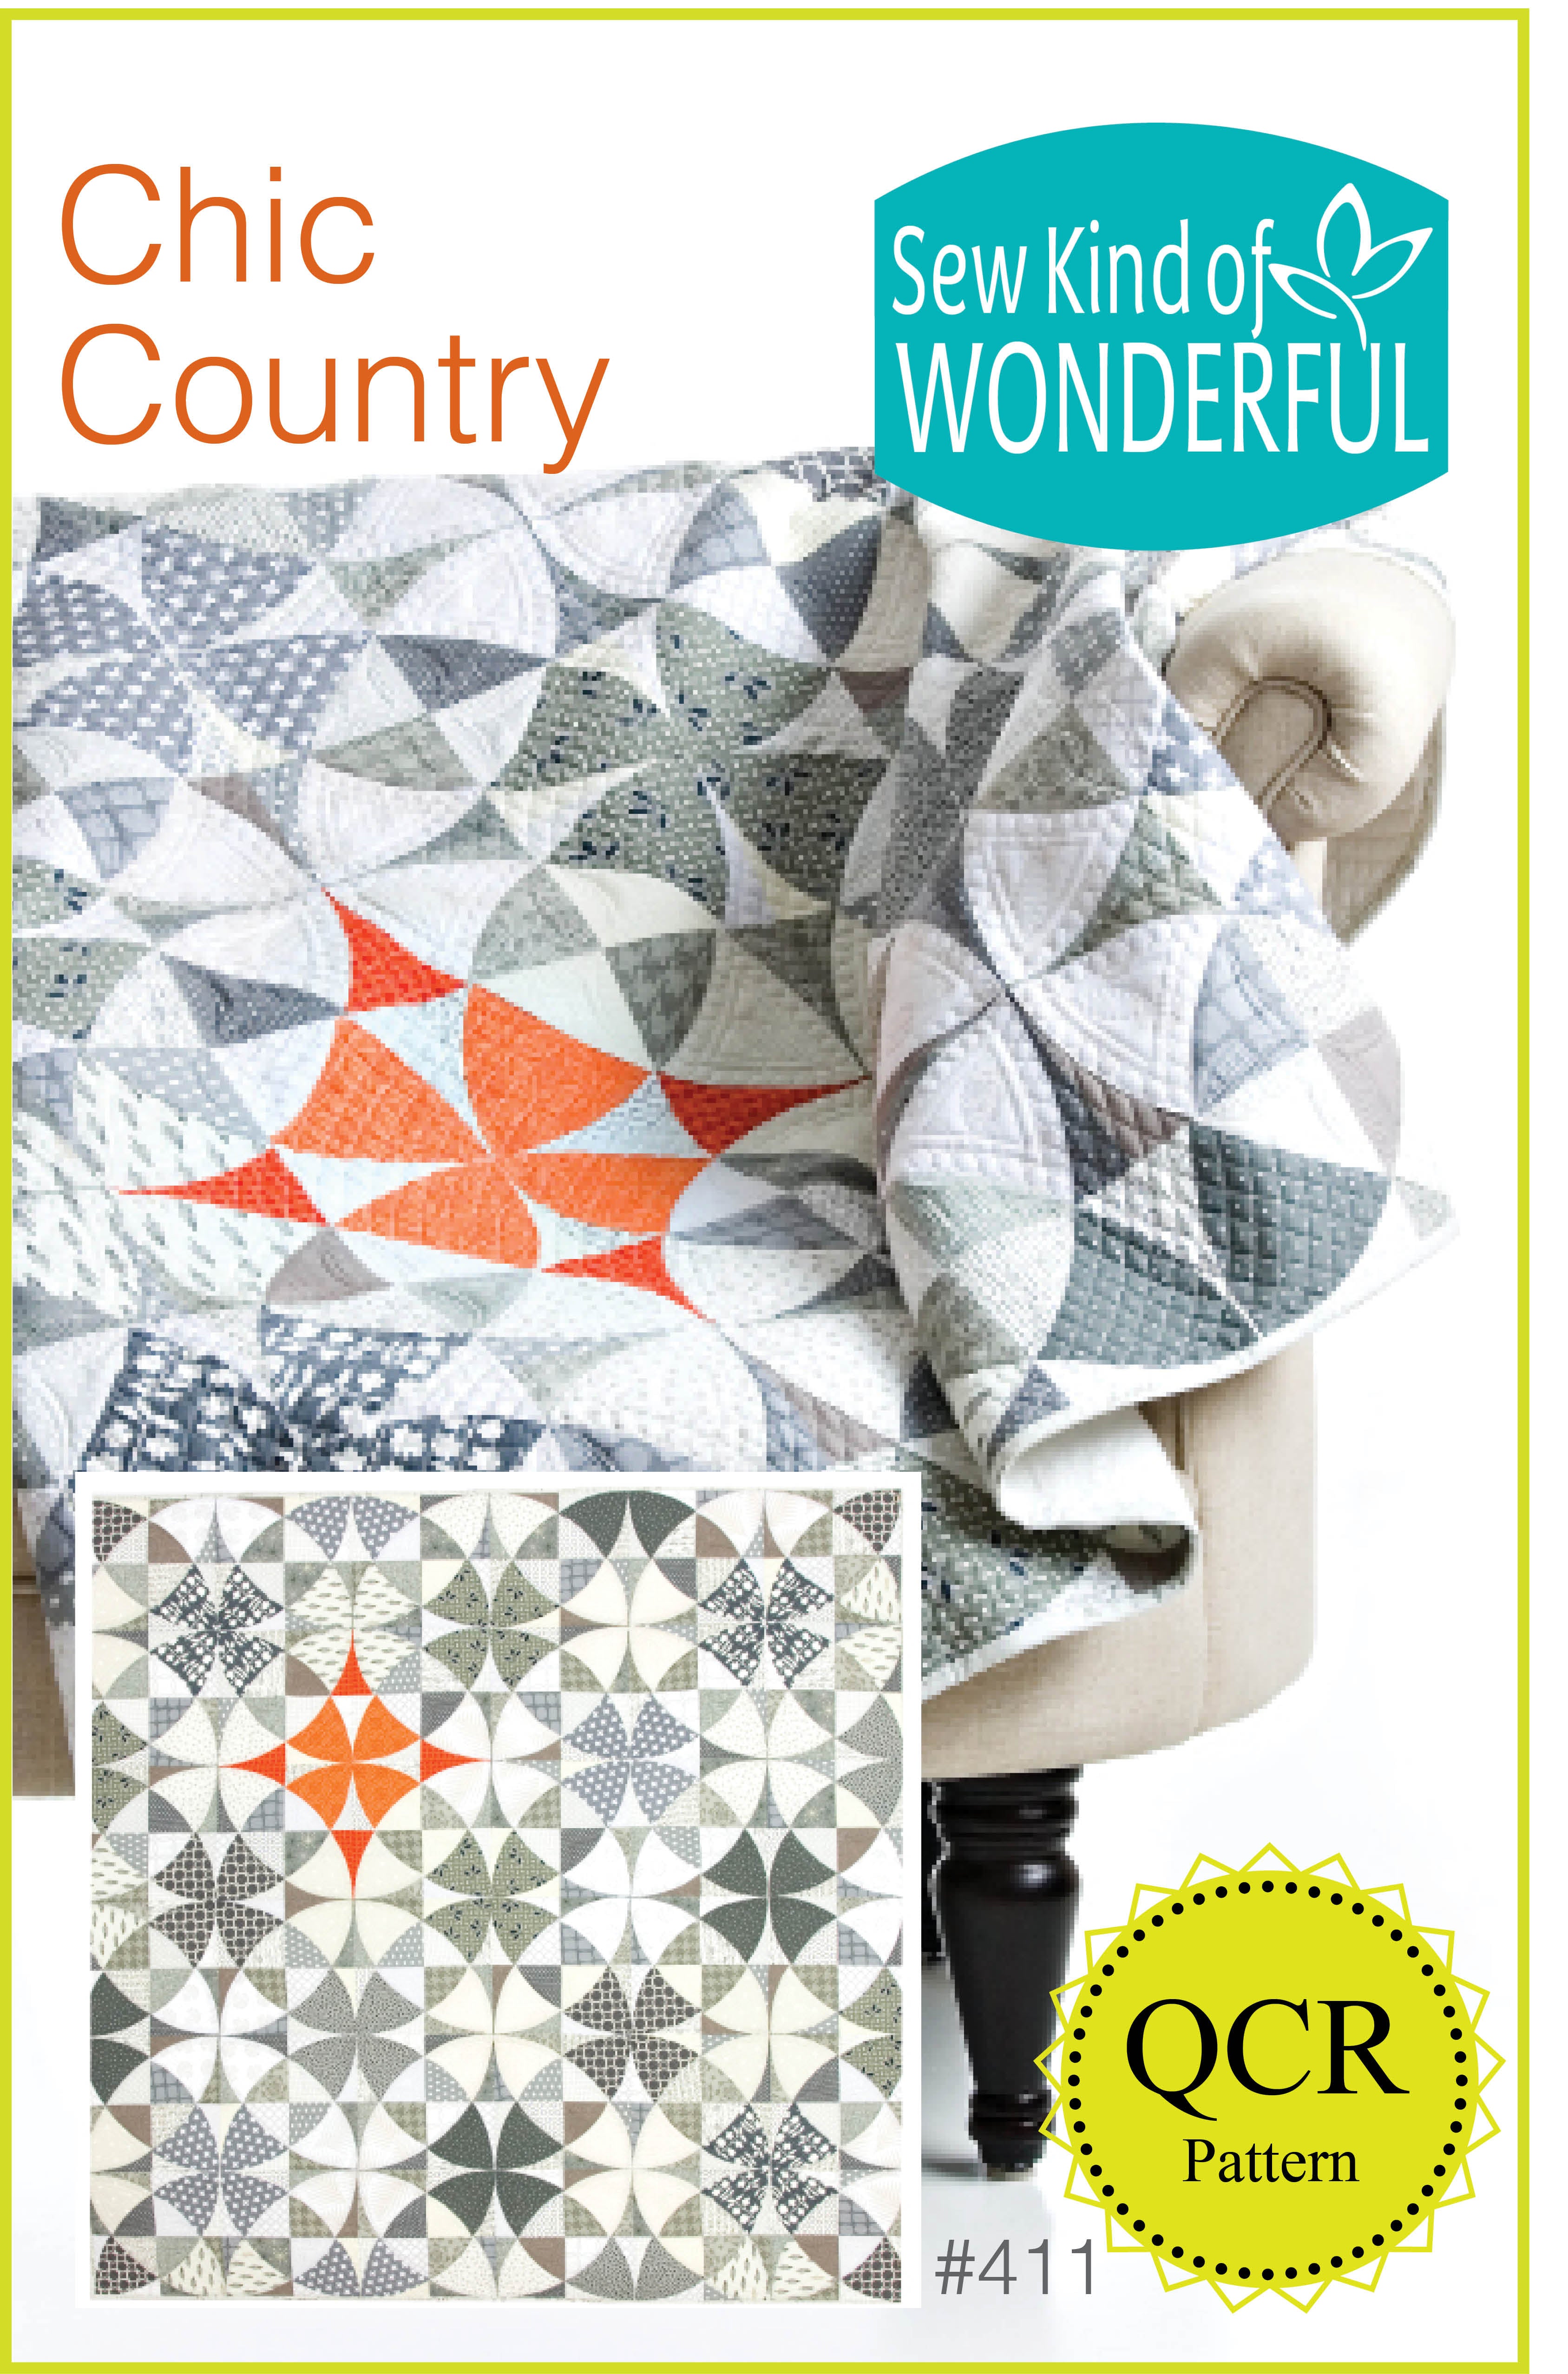 Chic Country – Sew Kind of Wonderful